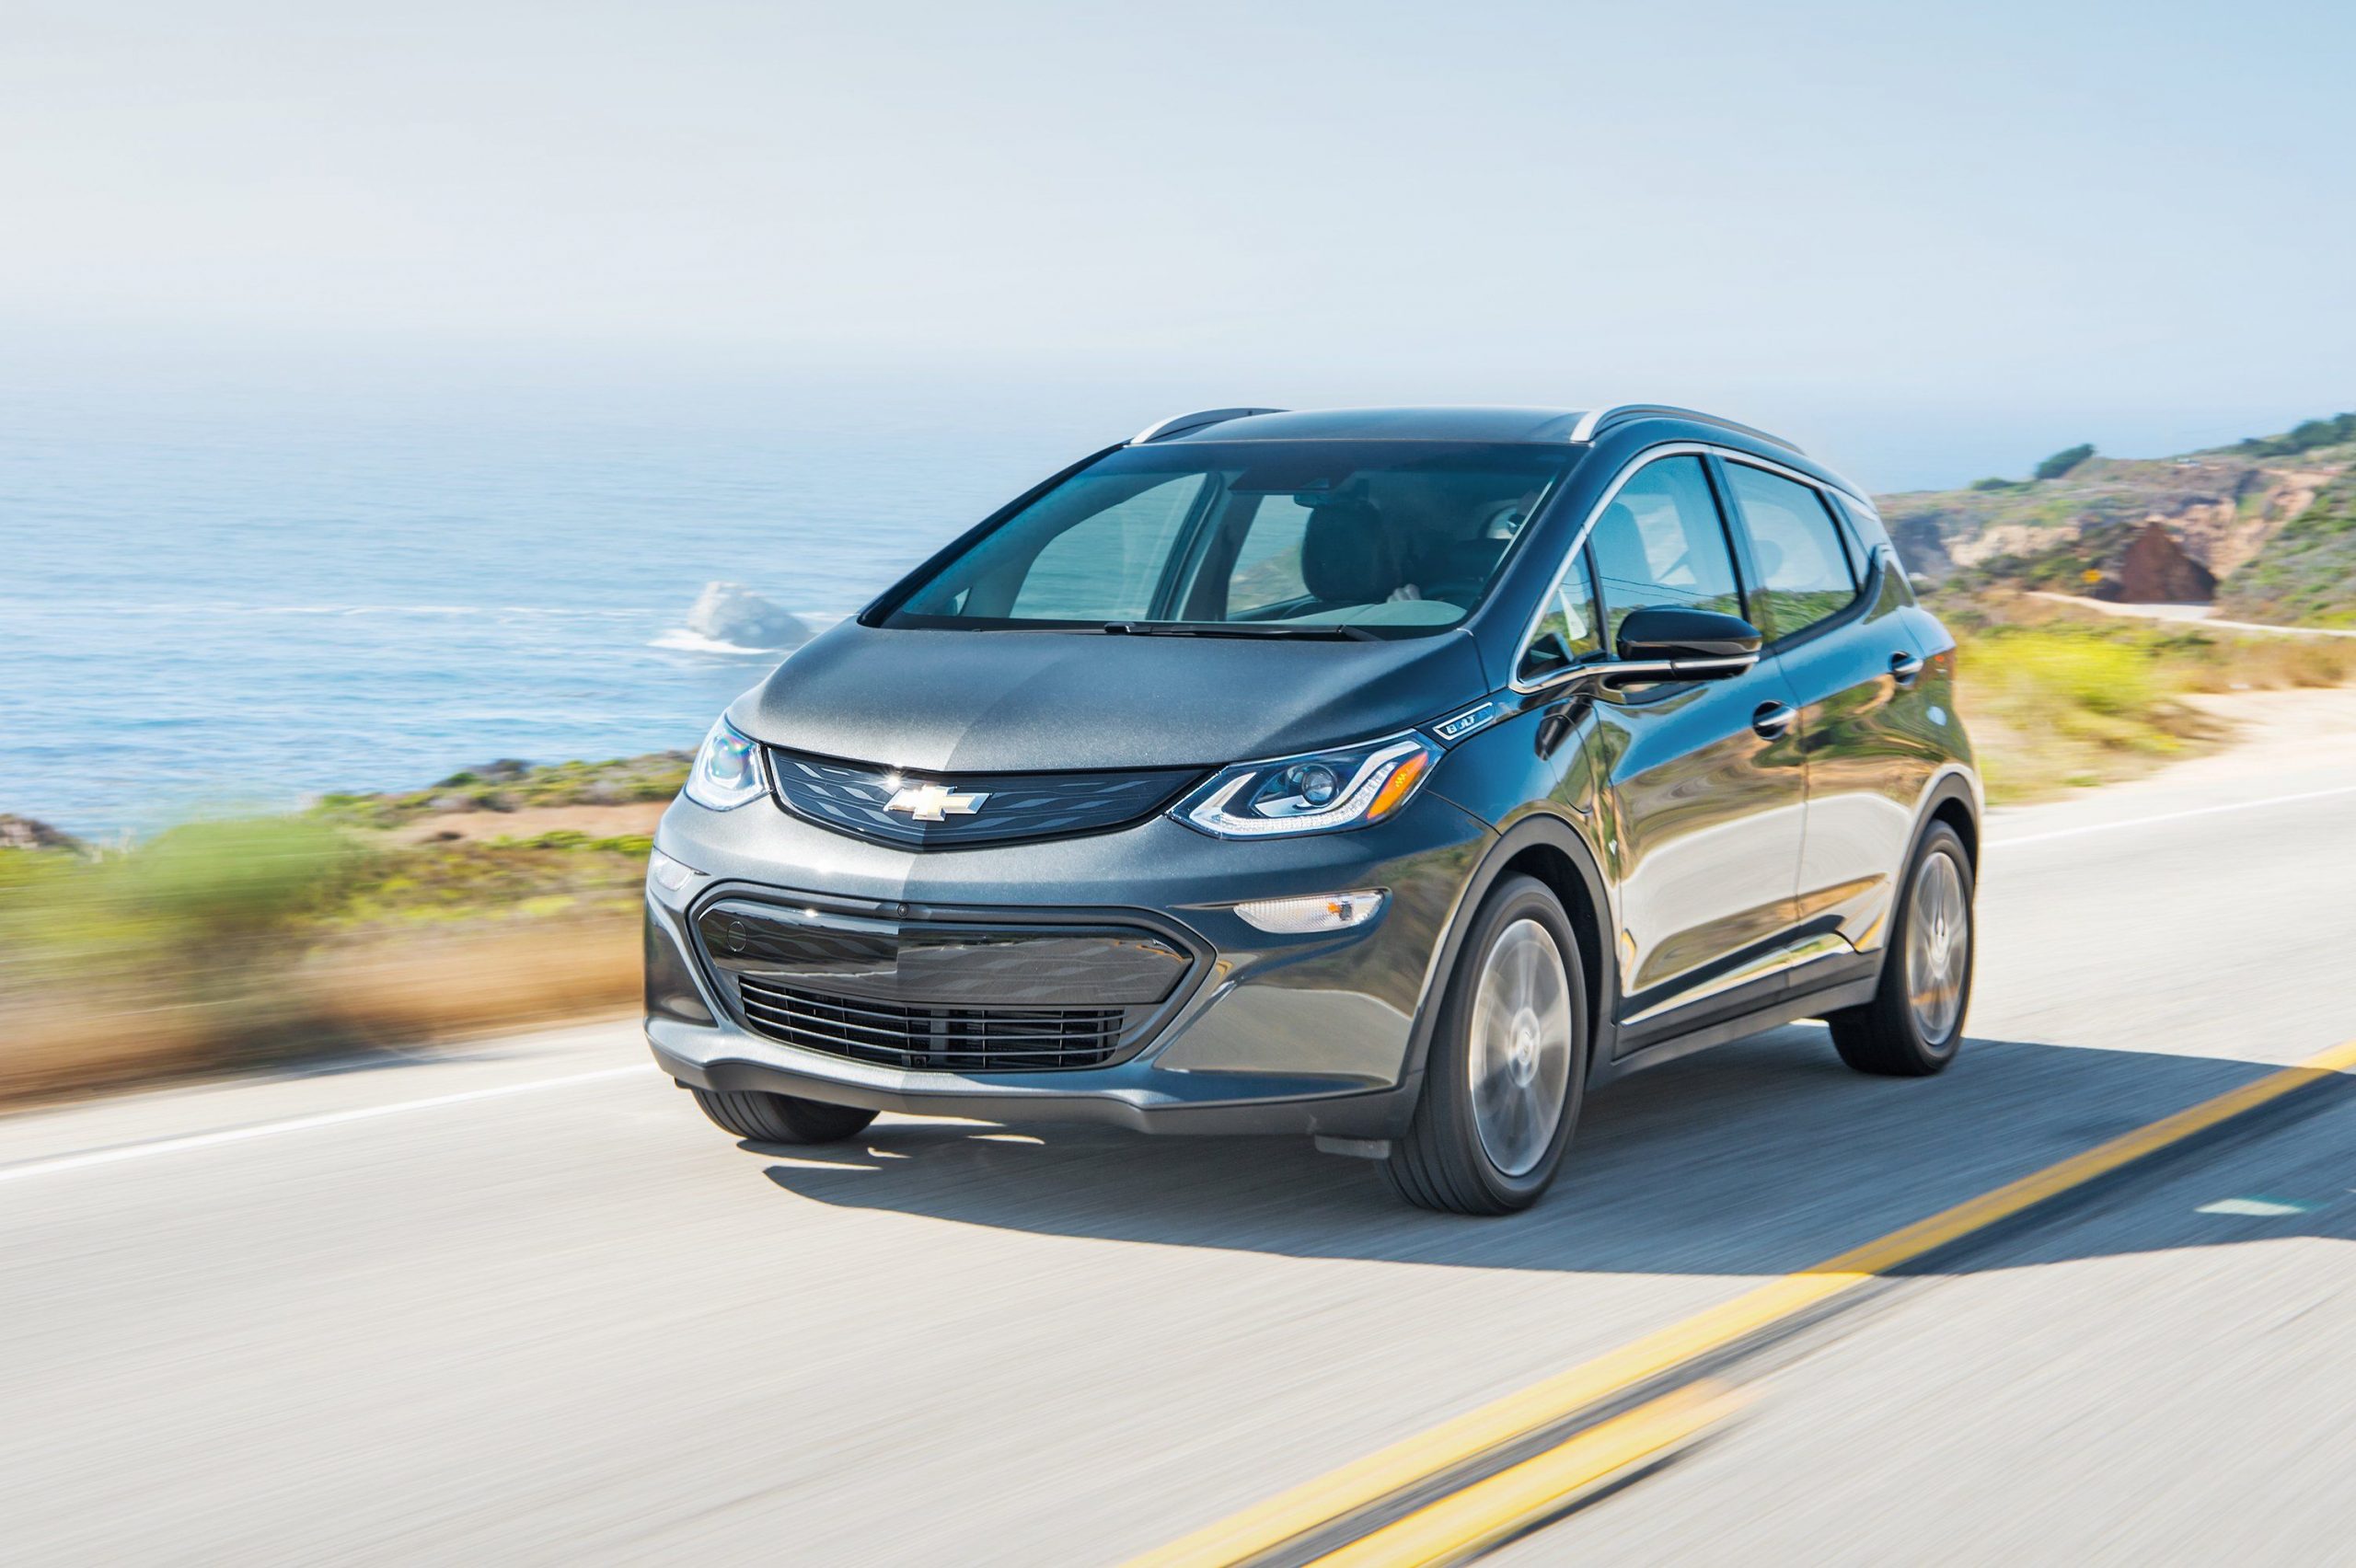 General Motors recalls all Chevrolet Bolt electric vehicles due to fire risk